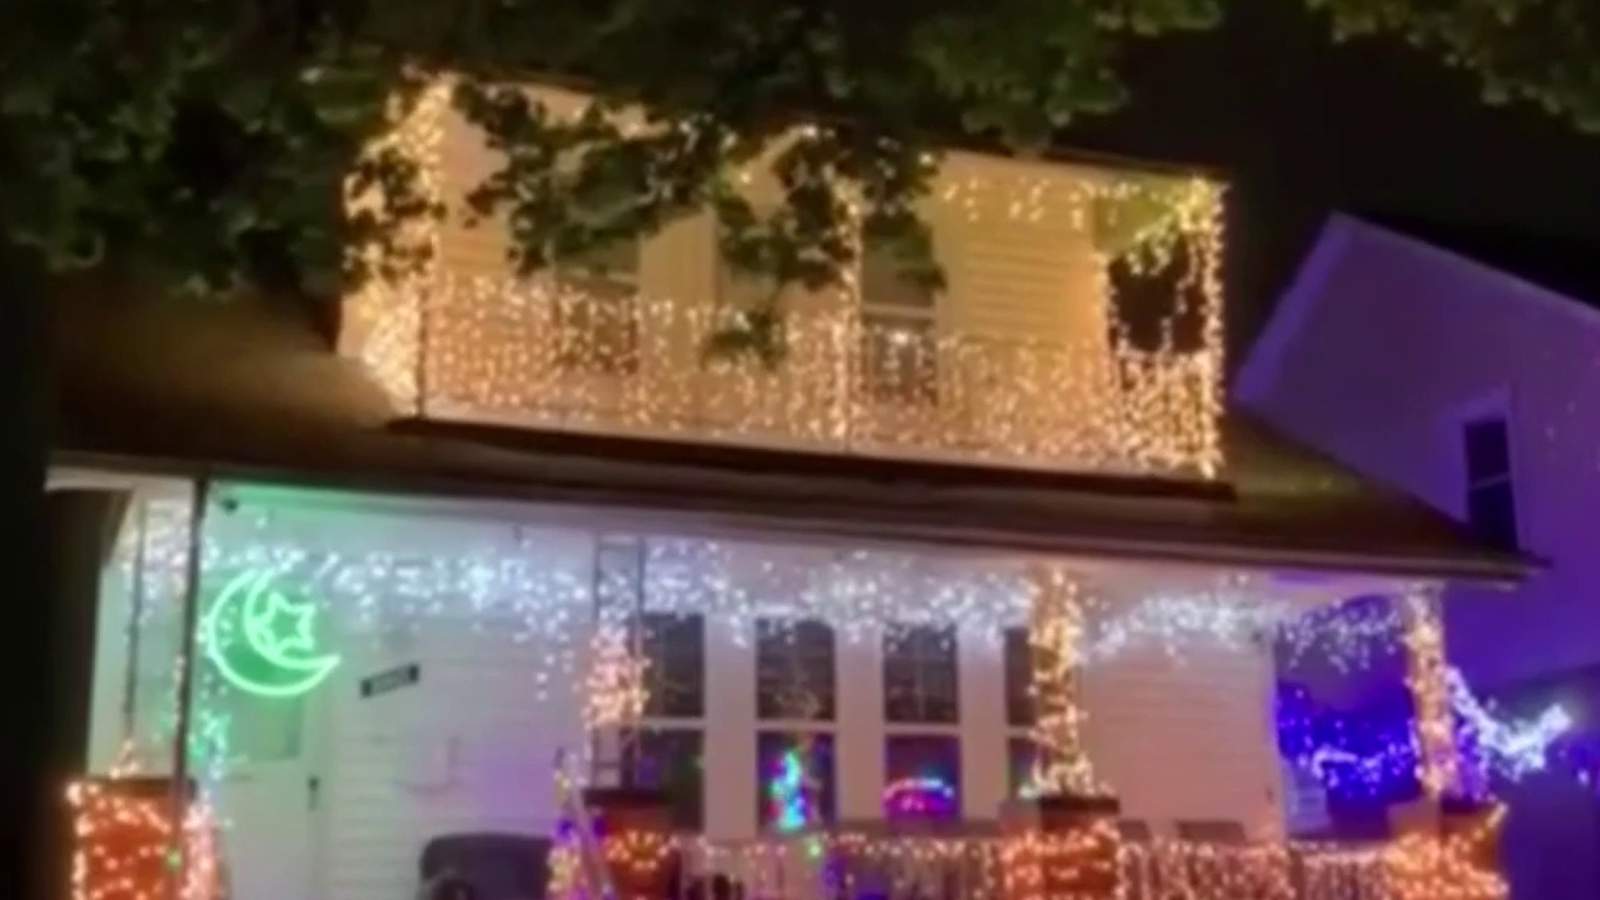 Ramadan lights challenge in Dearborn helps families celebrate while social distancing